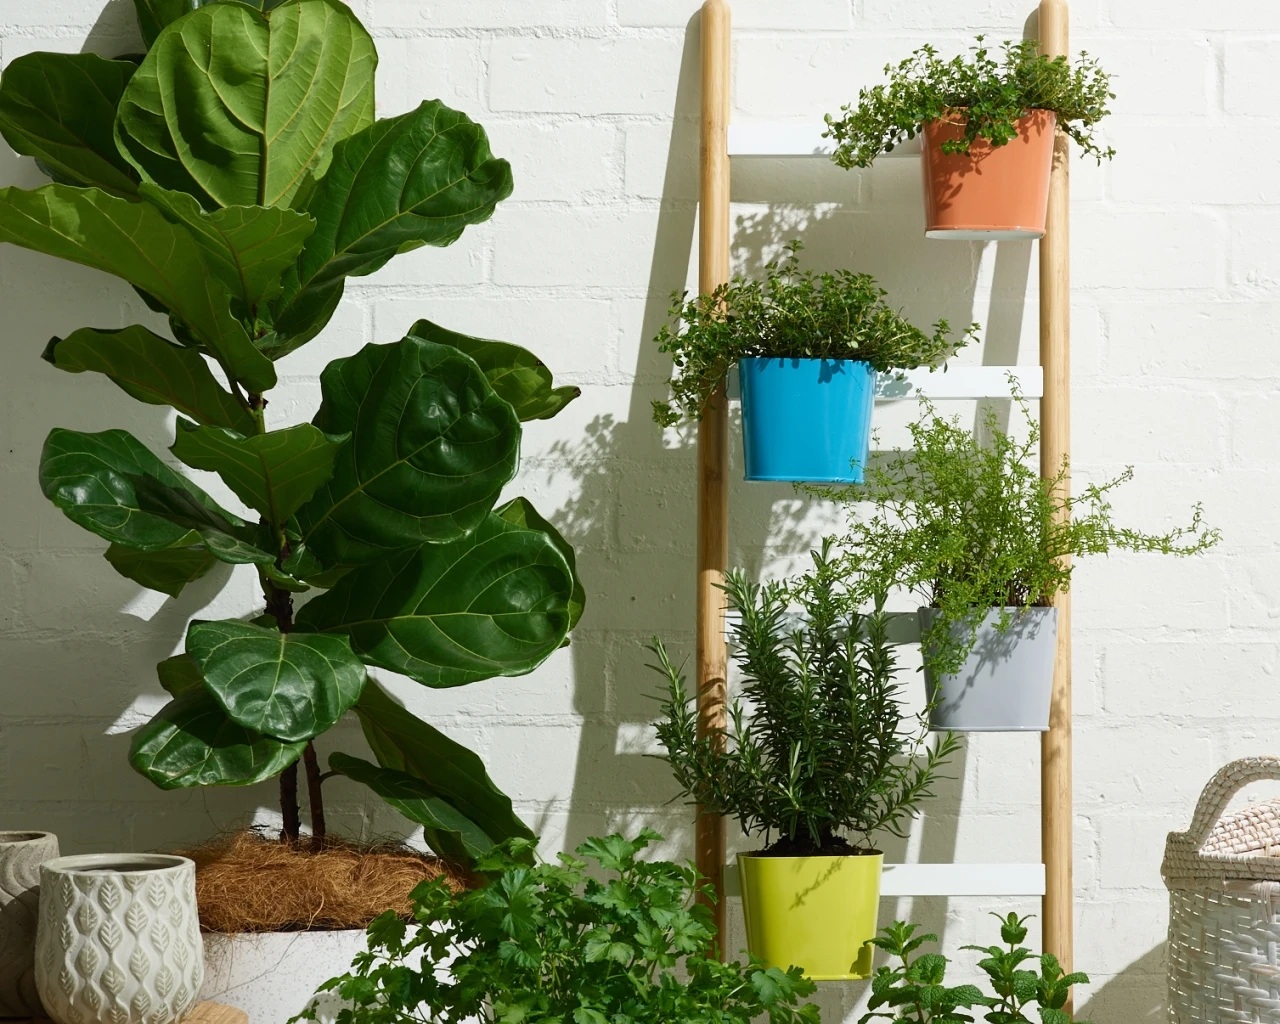 Coloured pot plants on a ladder against white wall